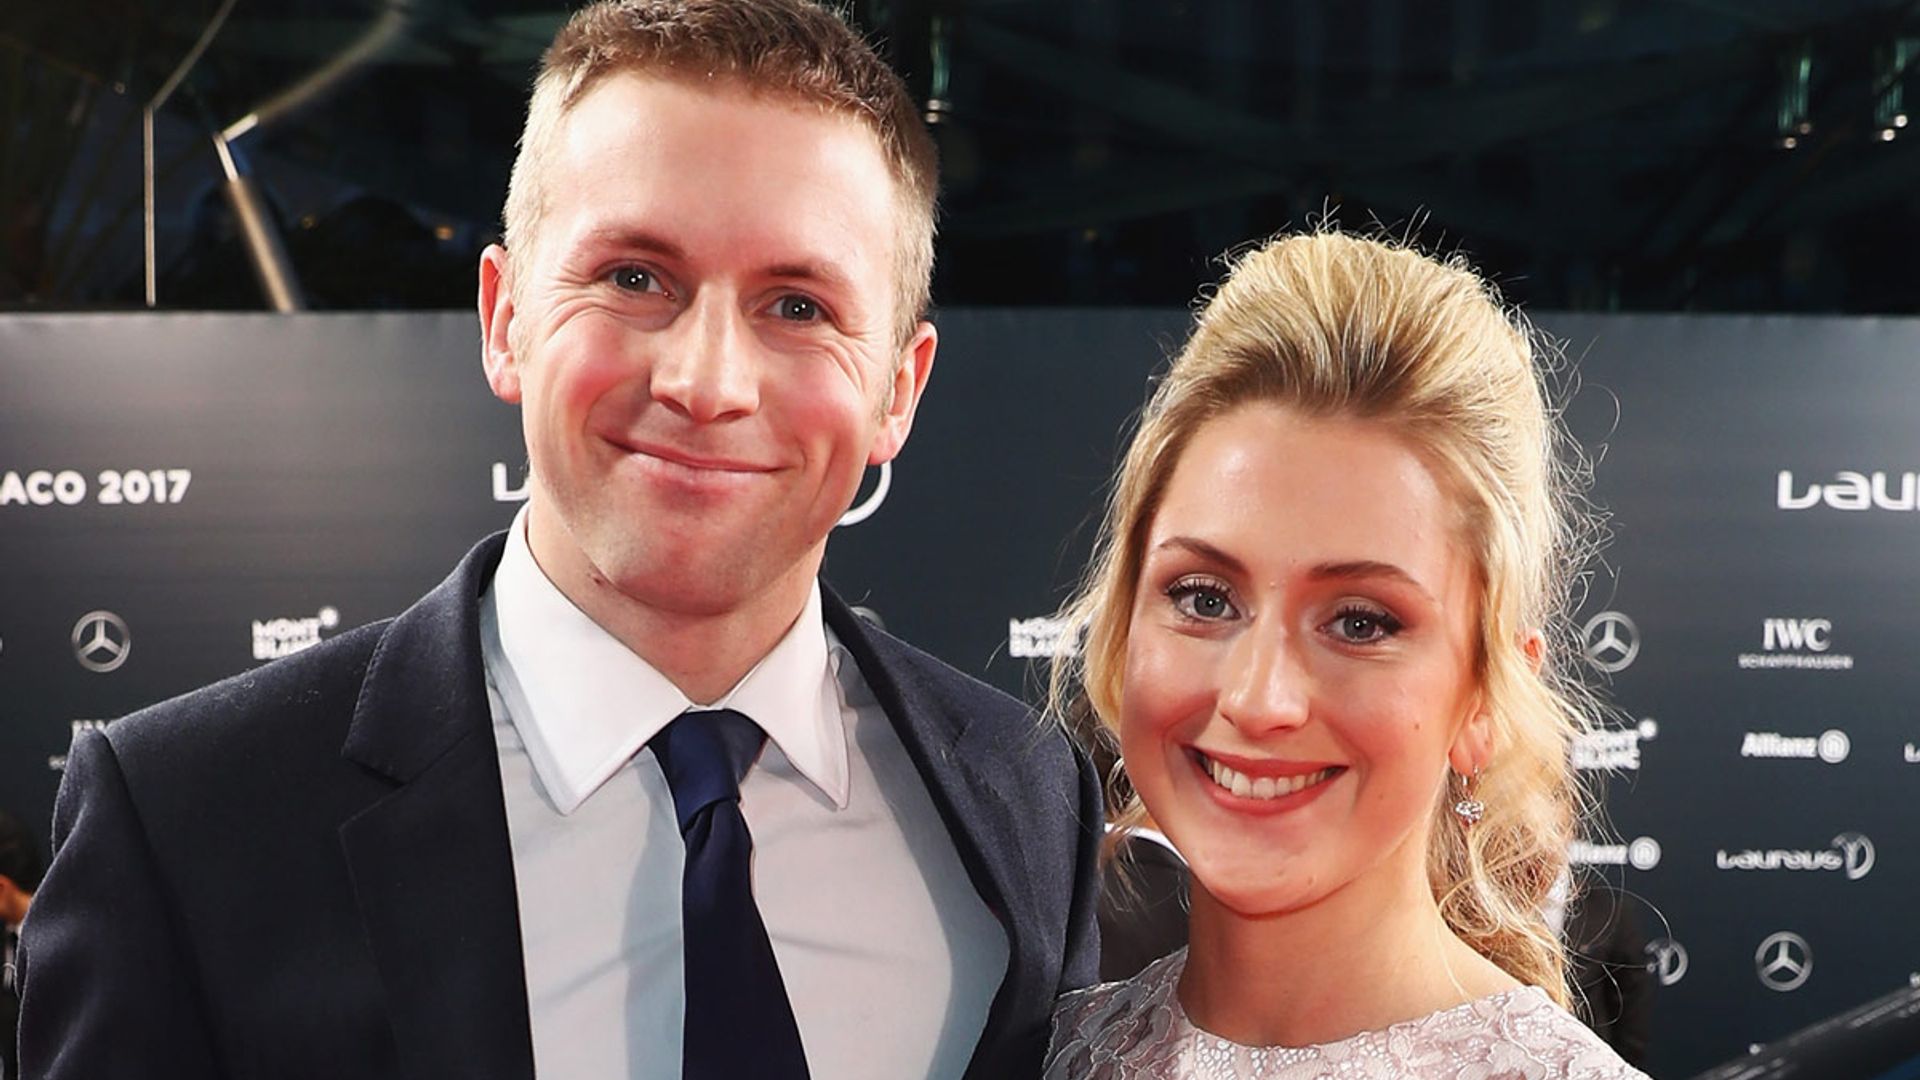 Laura Kenny looks sensational in never-before-seen wedding photo with Jason